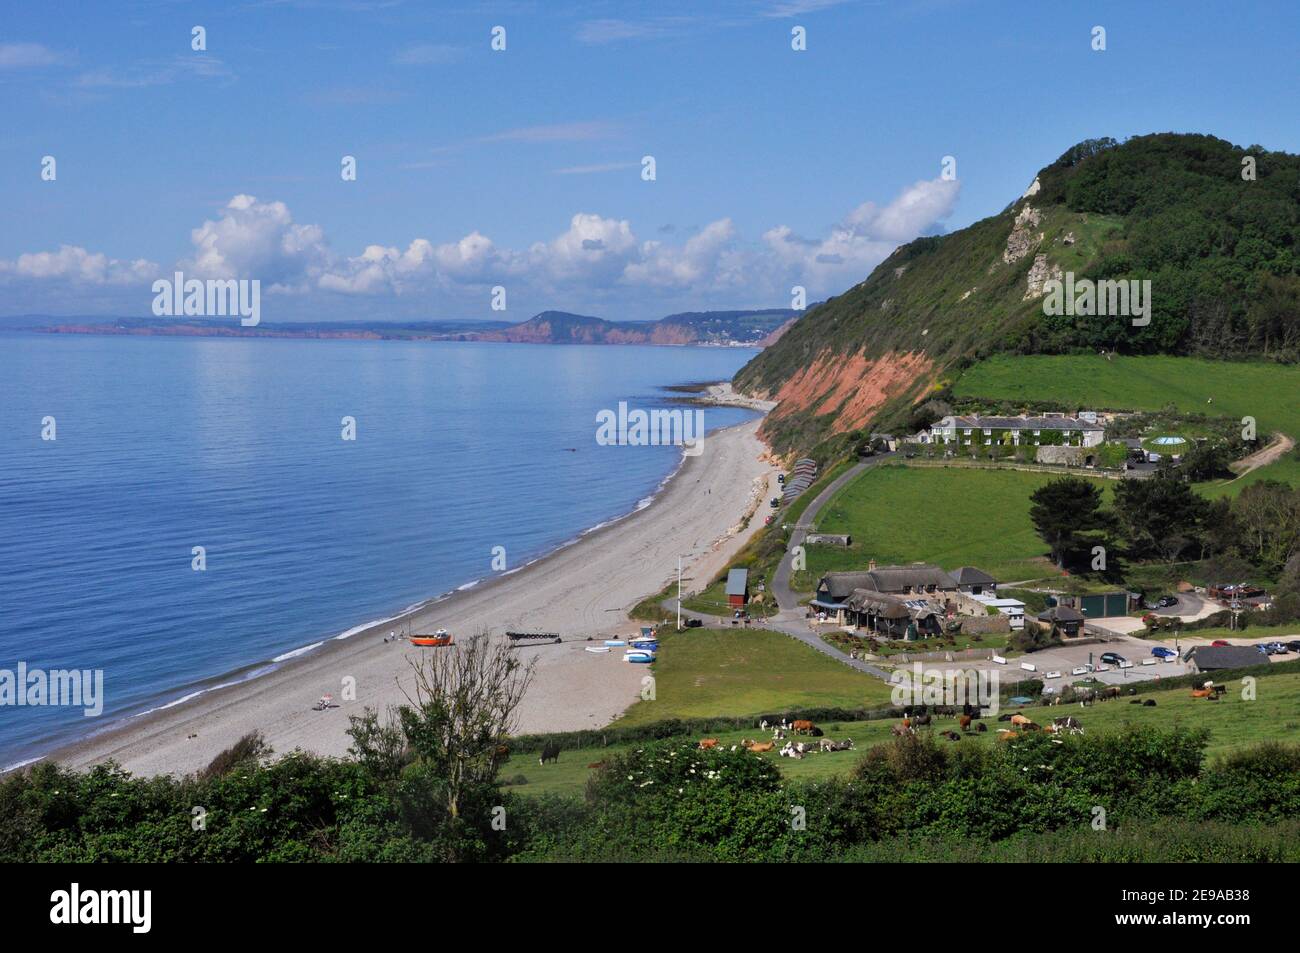 Looking west along the Jurrassic coast with the seaside village of Branscombe in the foreground.Devon. UK Stock Photo